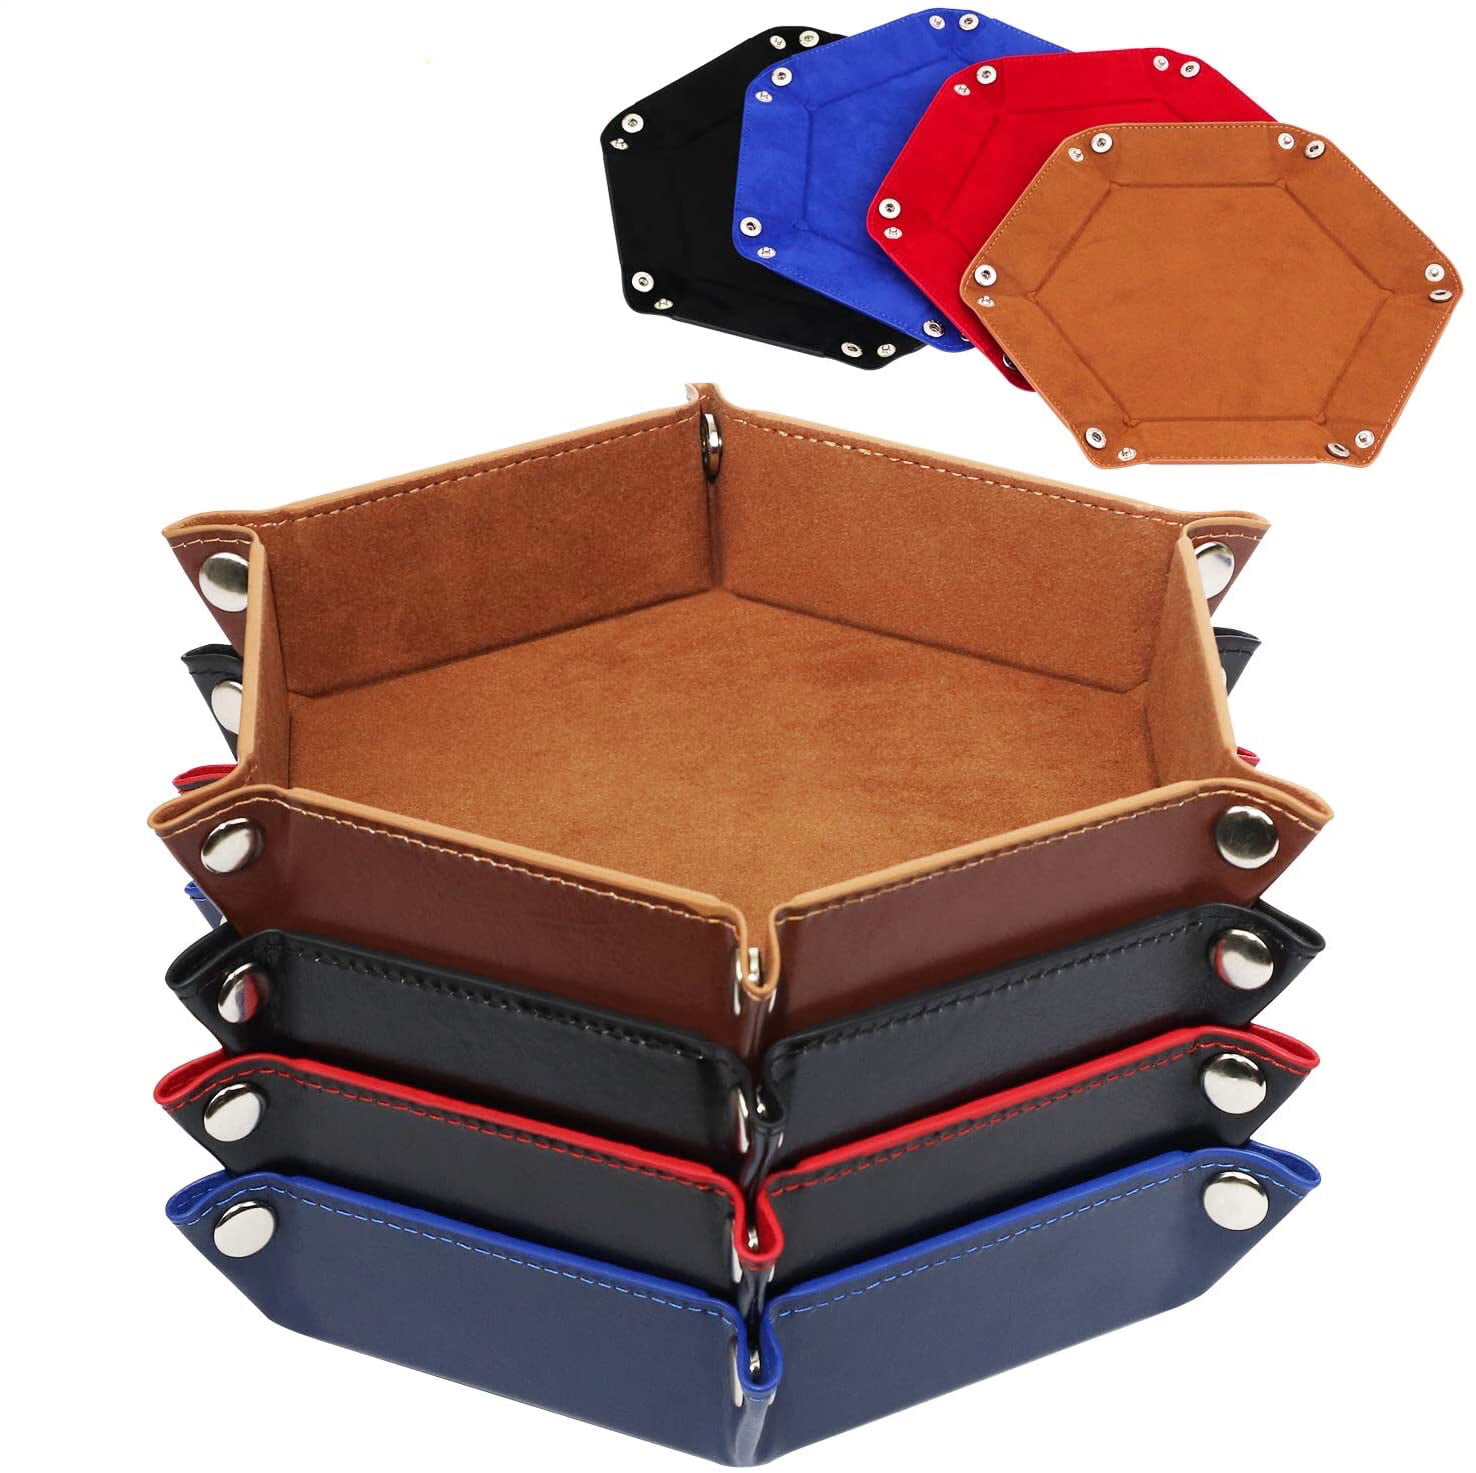 Leather Valet Tray Dresser Organizer Plate for Change Coin Key Opening Peacock Dice Tray Folding Square Holder 